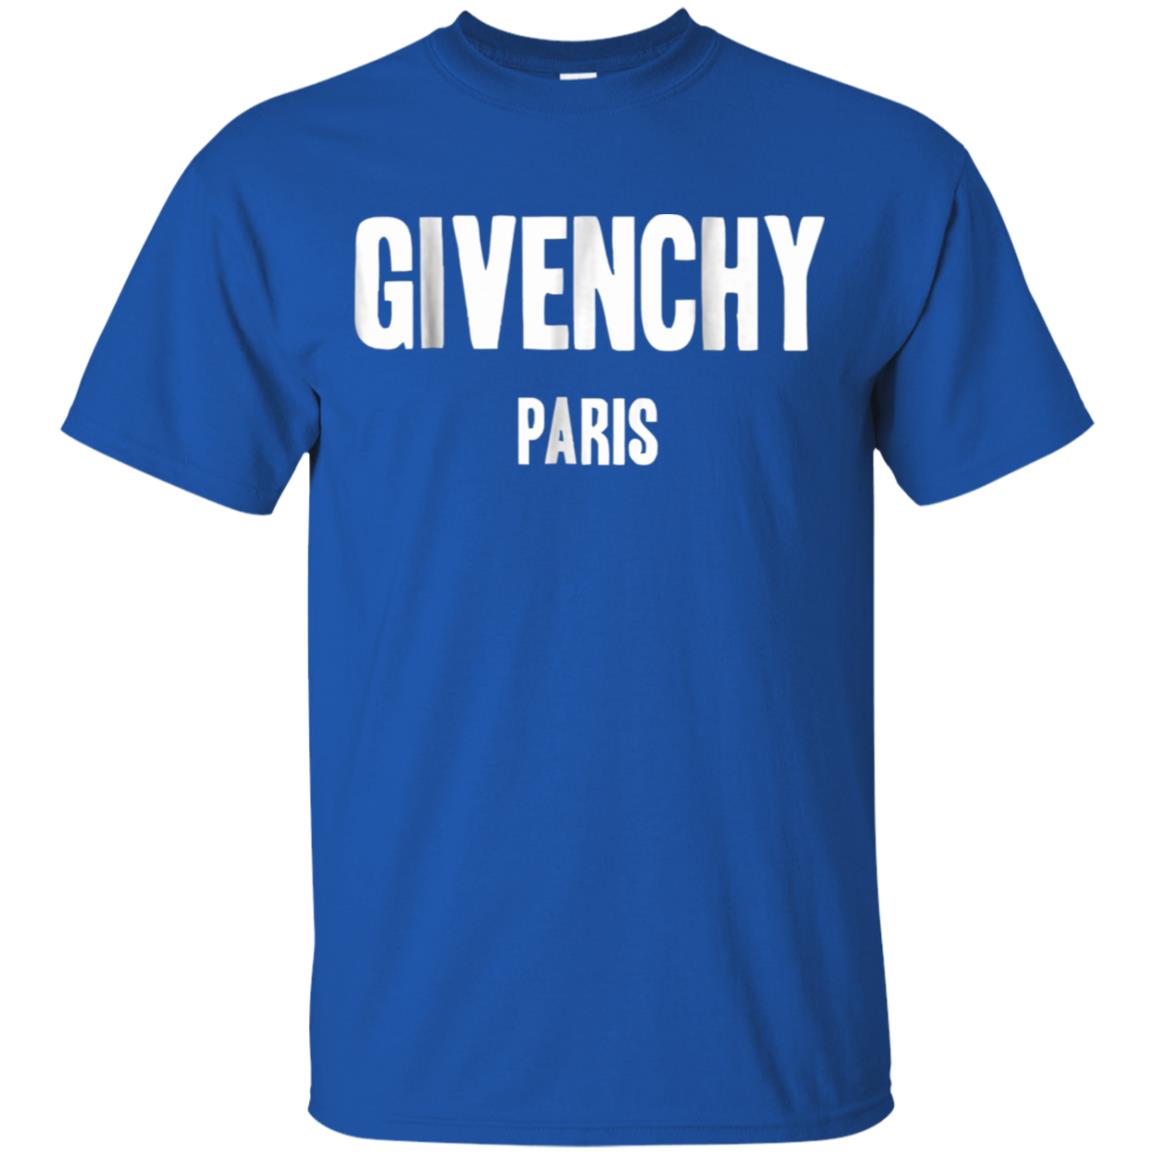 Awesome givenchy paris t shirt 